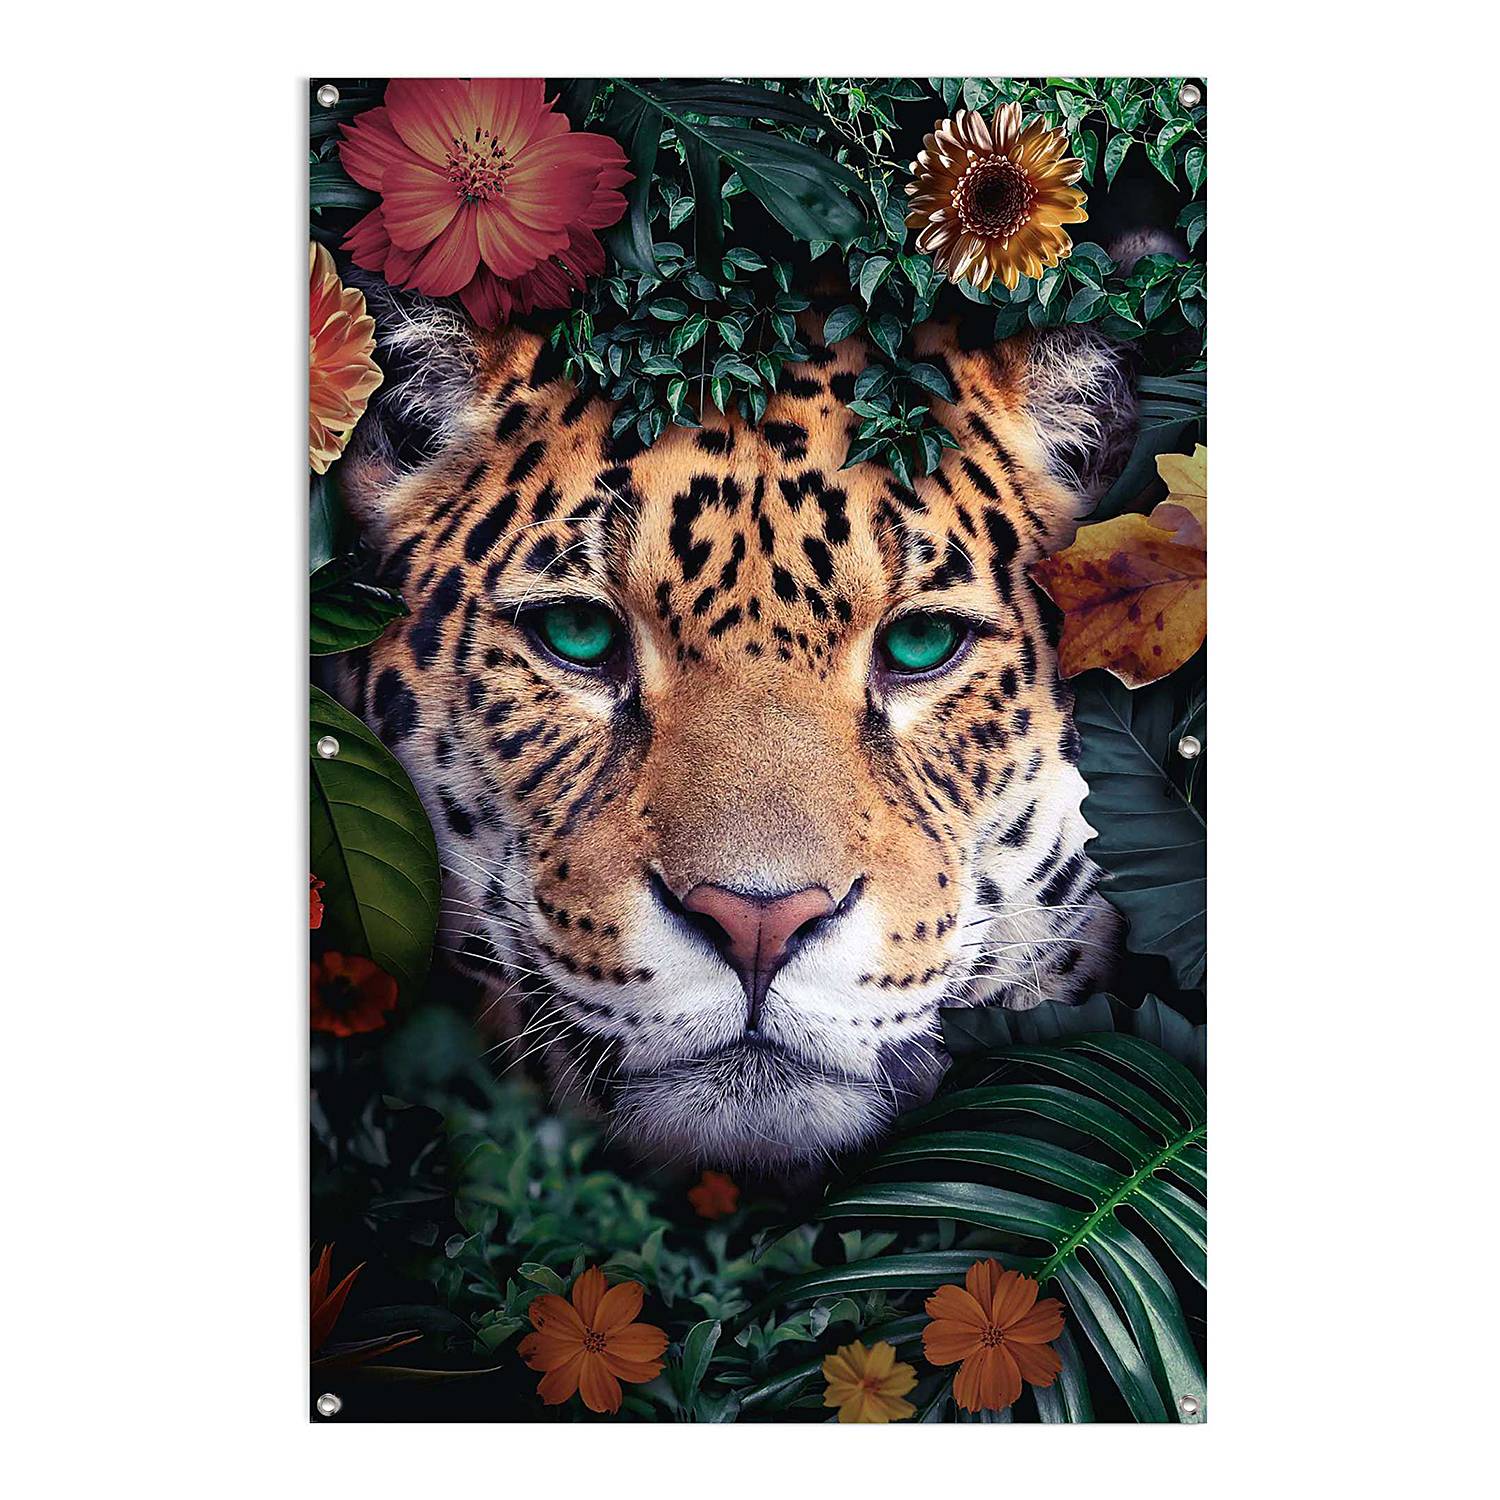 Outdoor-Poster Leopard kaufen | home24 | Poster